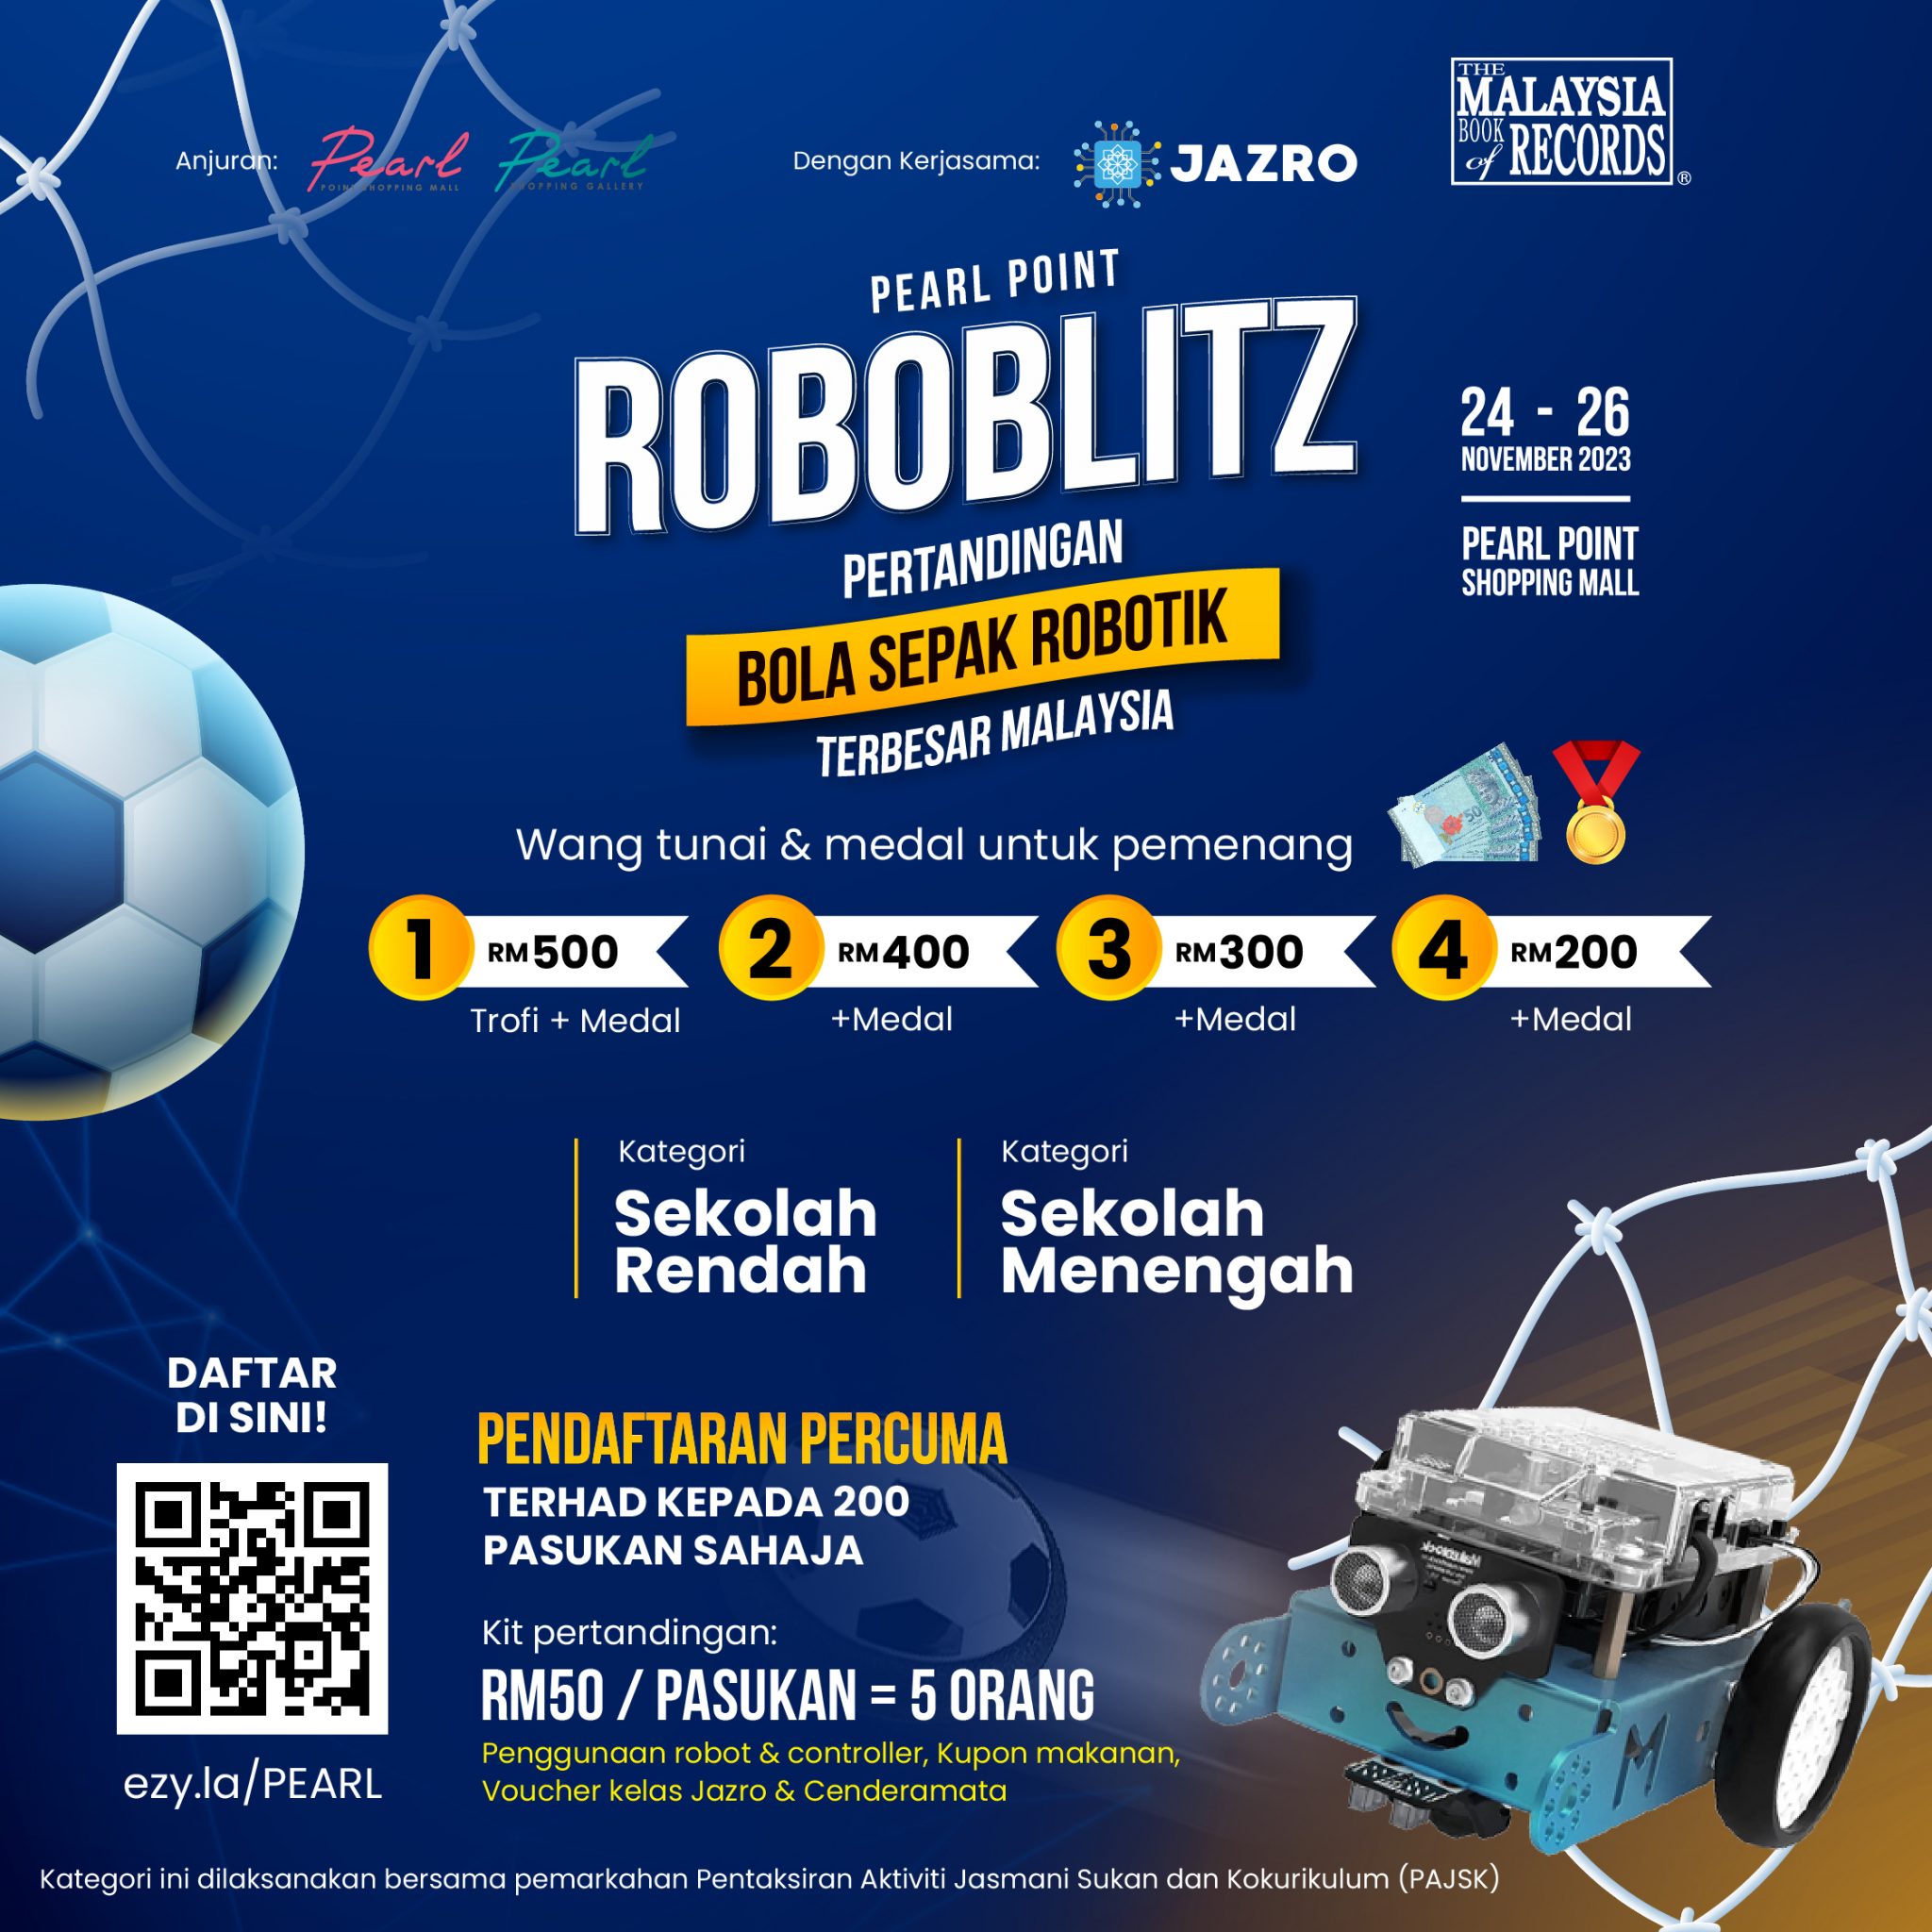 JAZRO and Pearl Point Shopping Mall host RoboBlitz soccer